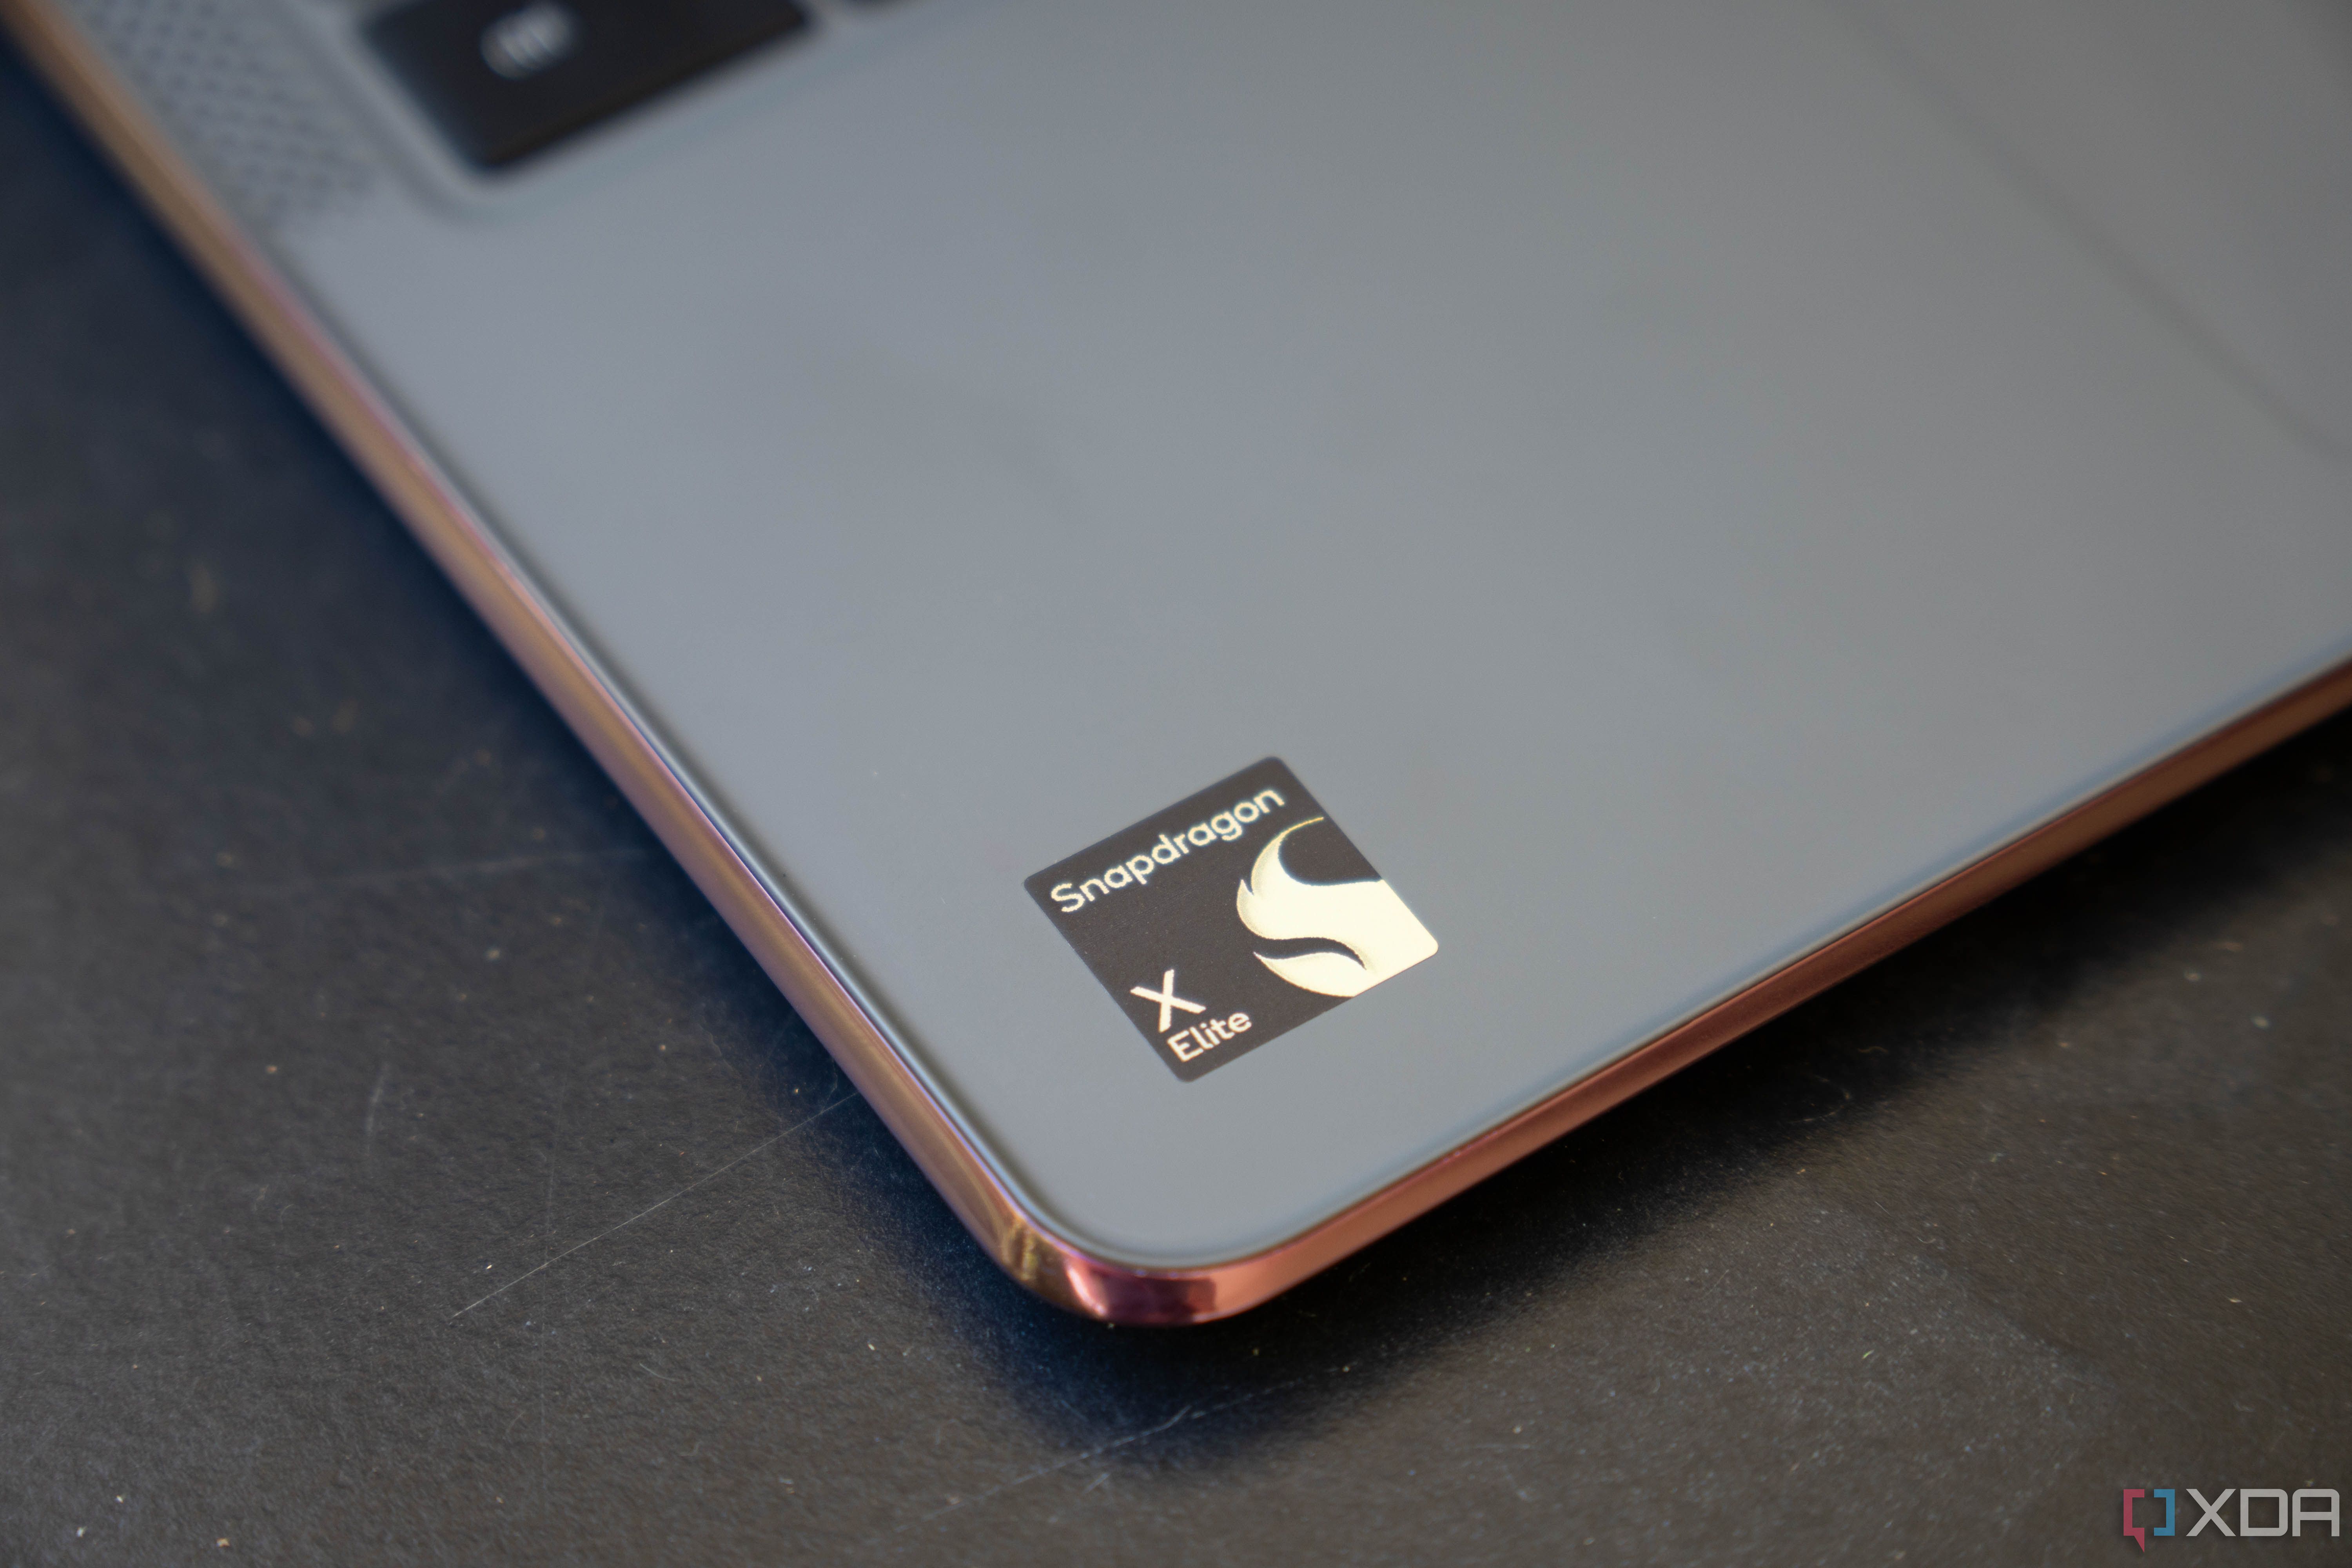 The Snapdragon X Elite badge on the palmrest of a laptop.